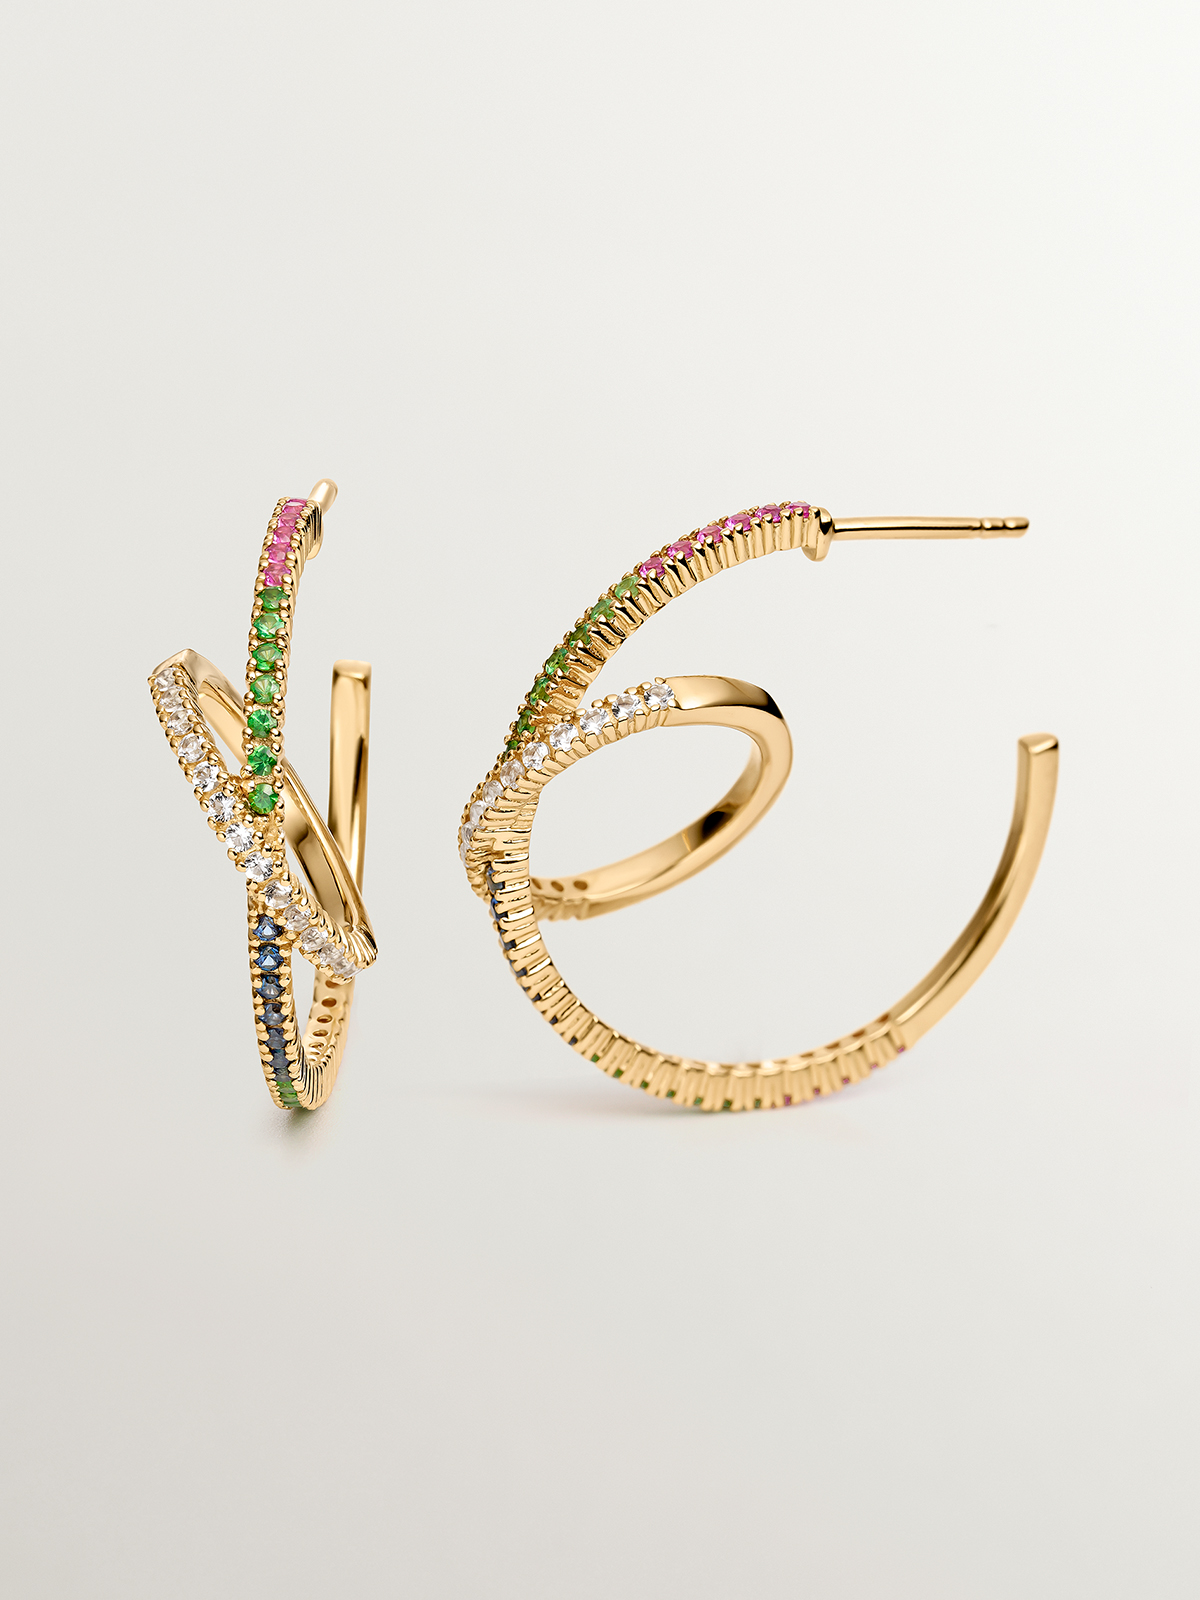 Dual hoop earrings made of 925 silver, bathed in 18K yellow gold with tsavorites and multicolored sapphires.